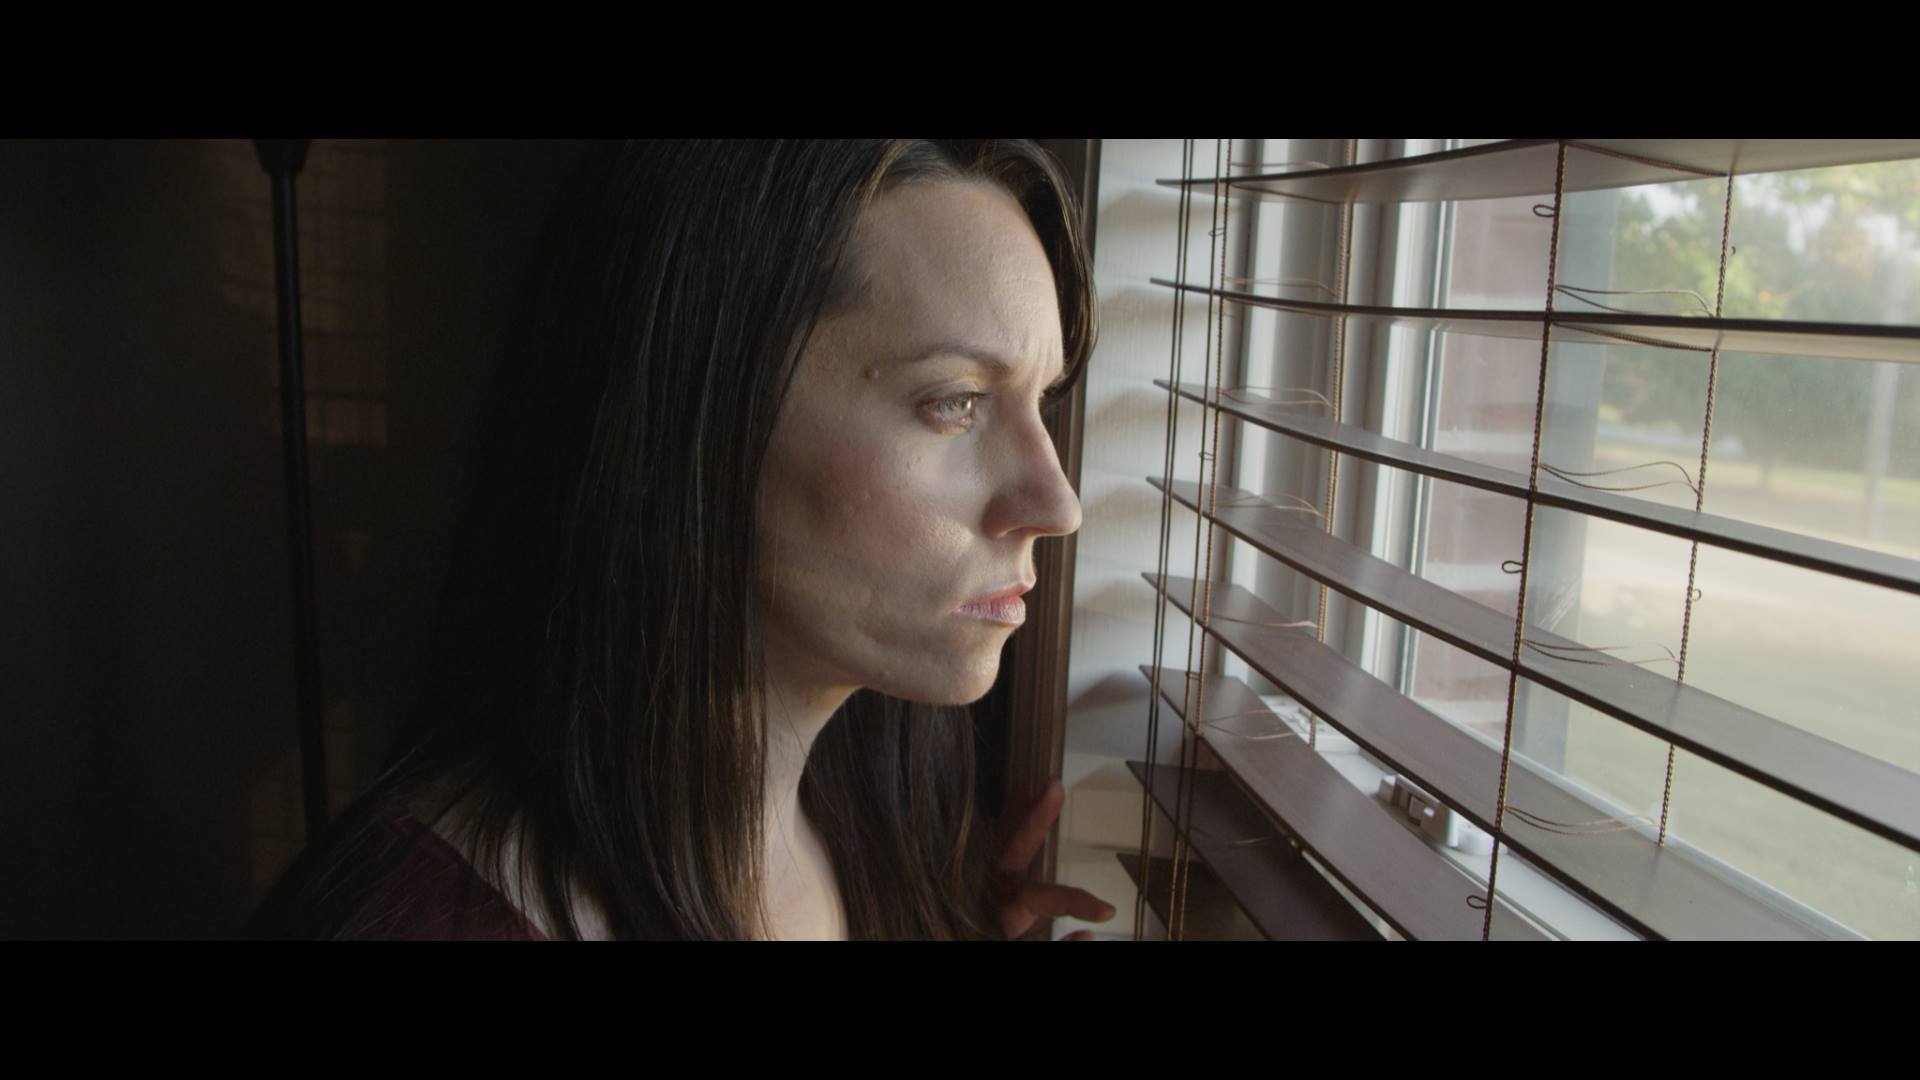 Still from feature film Dormant.